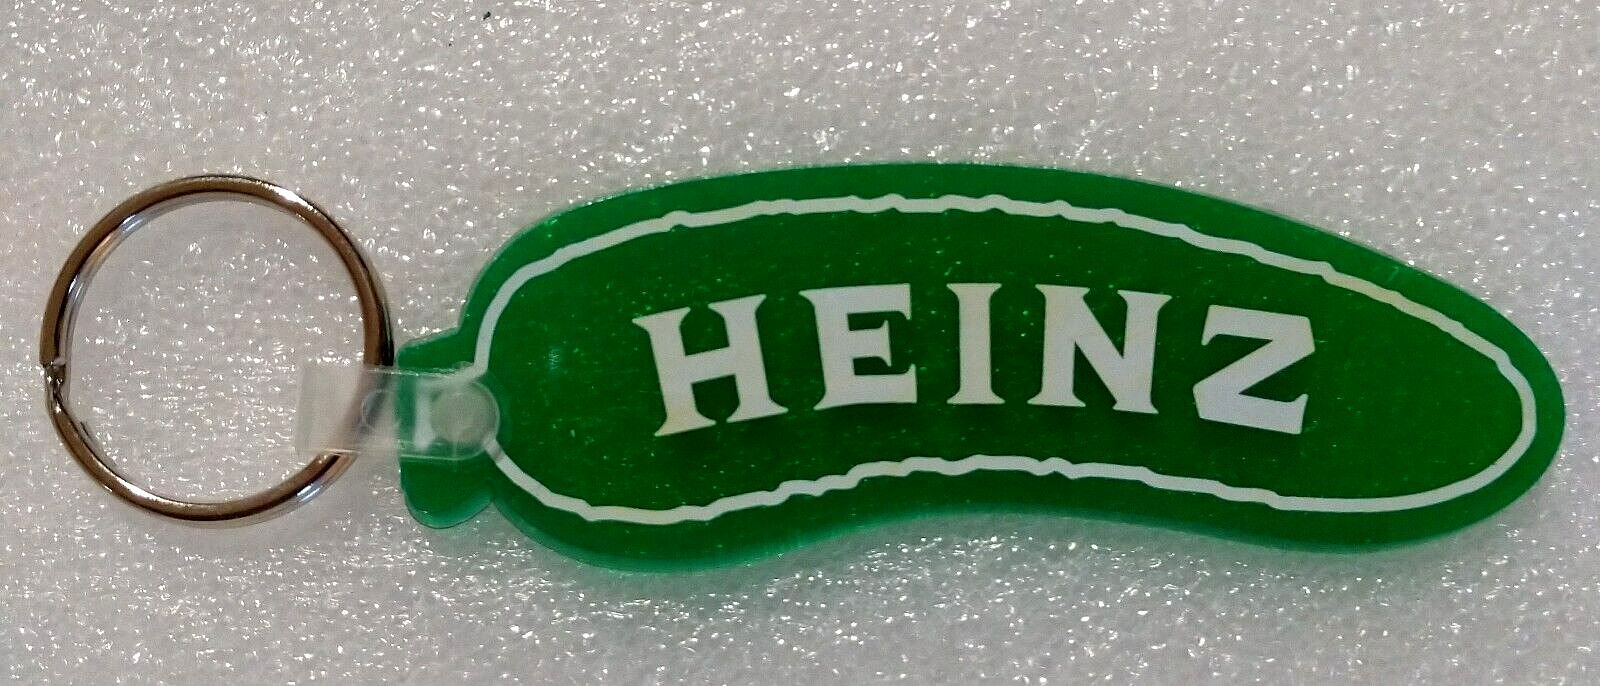 Advertising Premium Heinz Pickle Promo Key Chain NOS New Store Giveaway